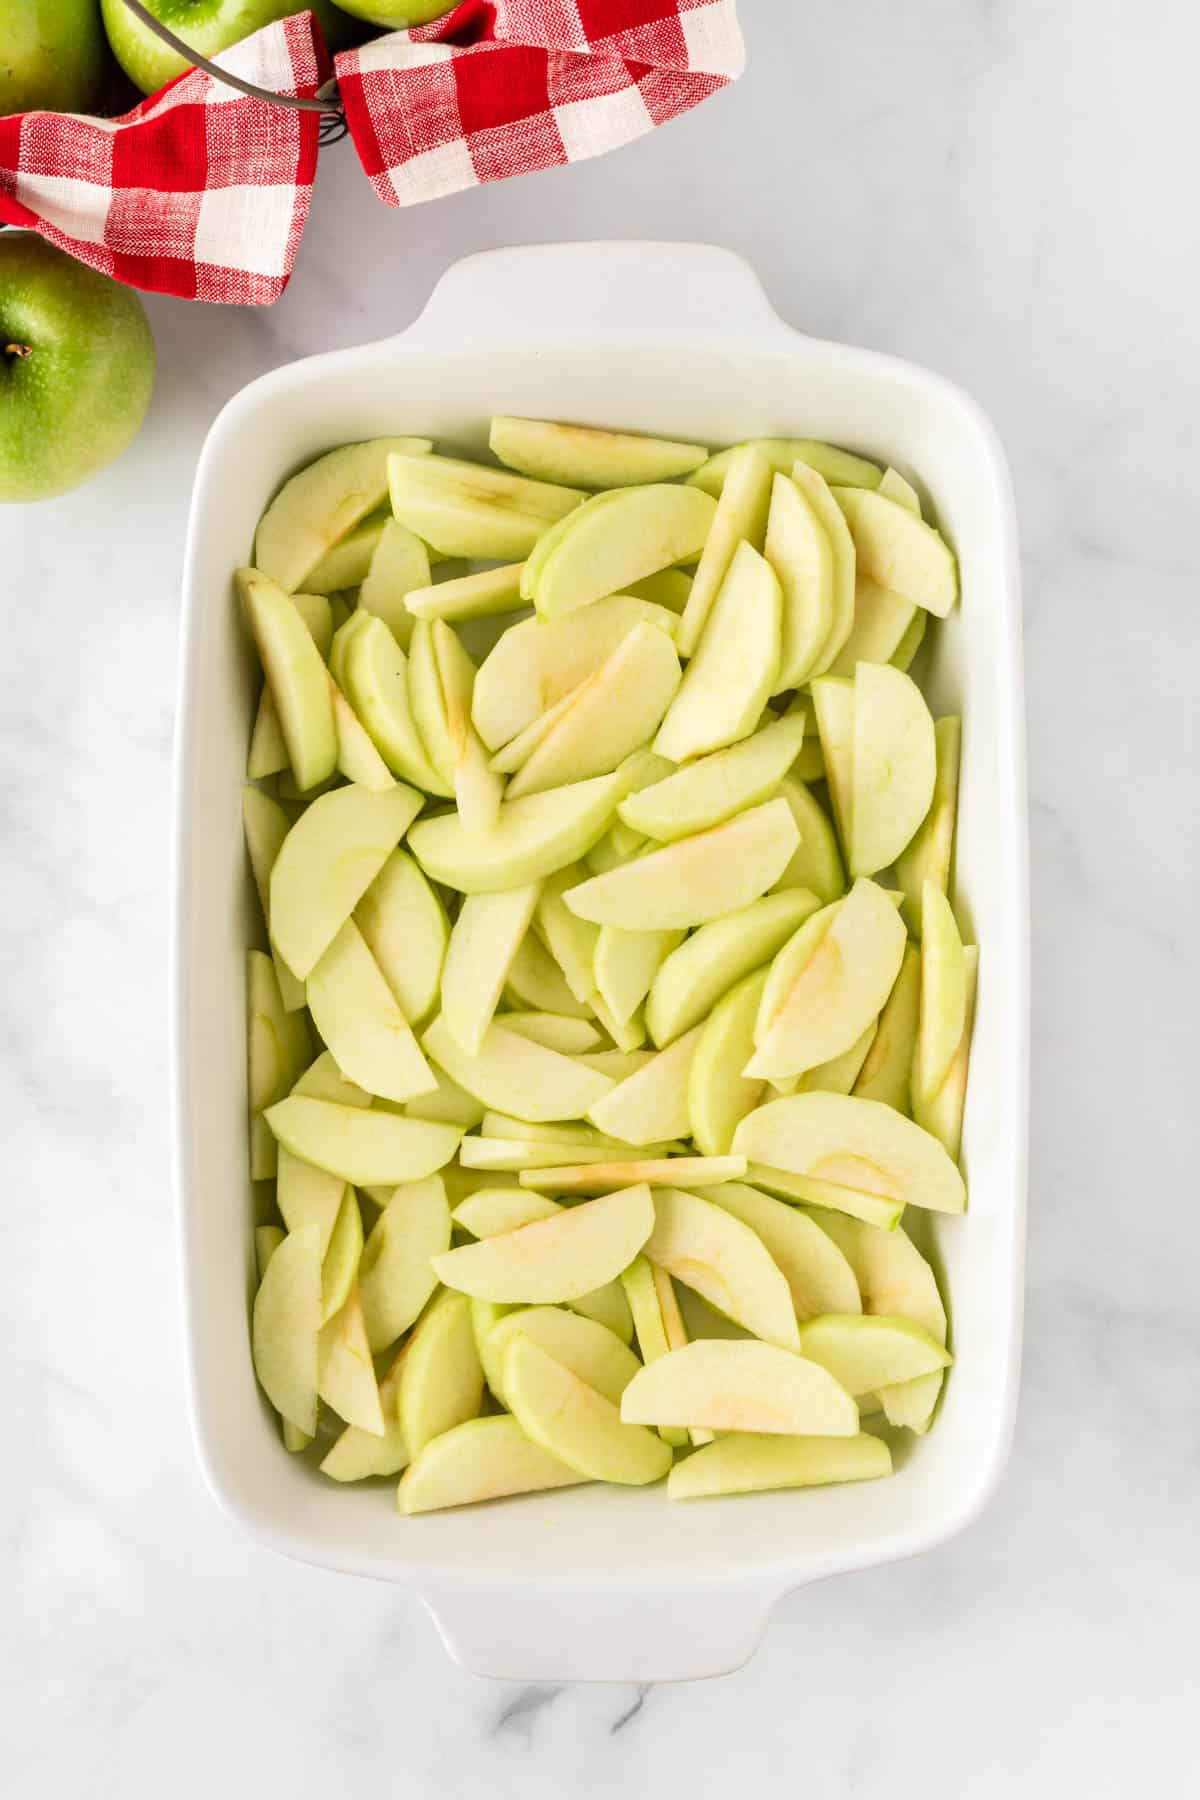 apple slices in a baking dish